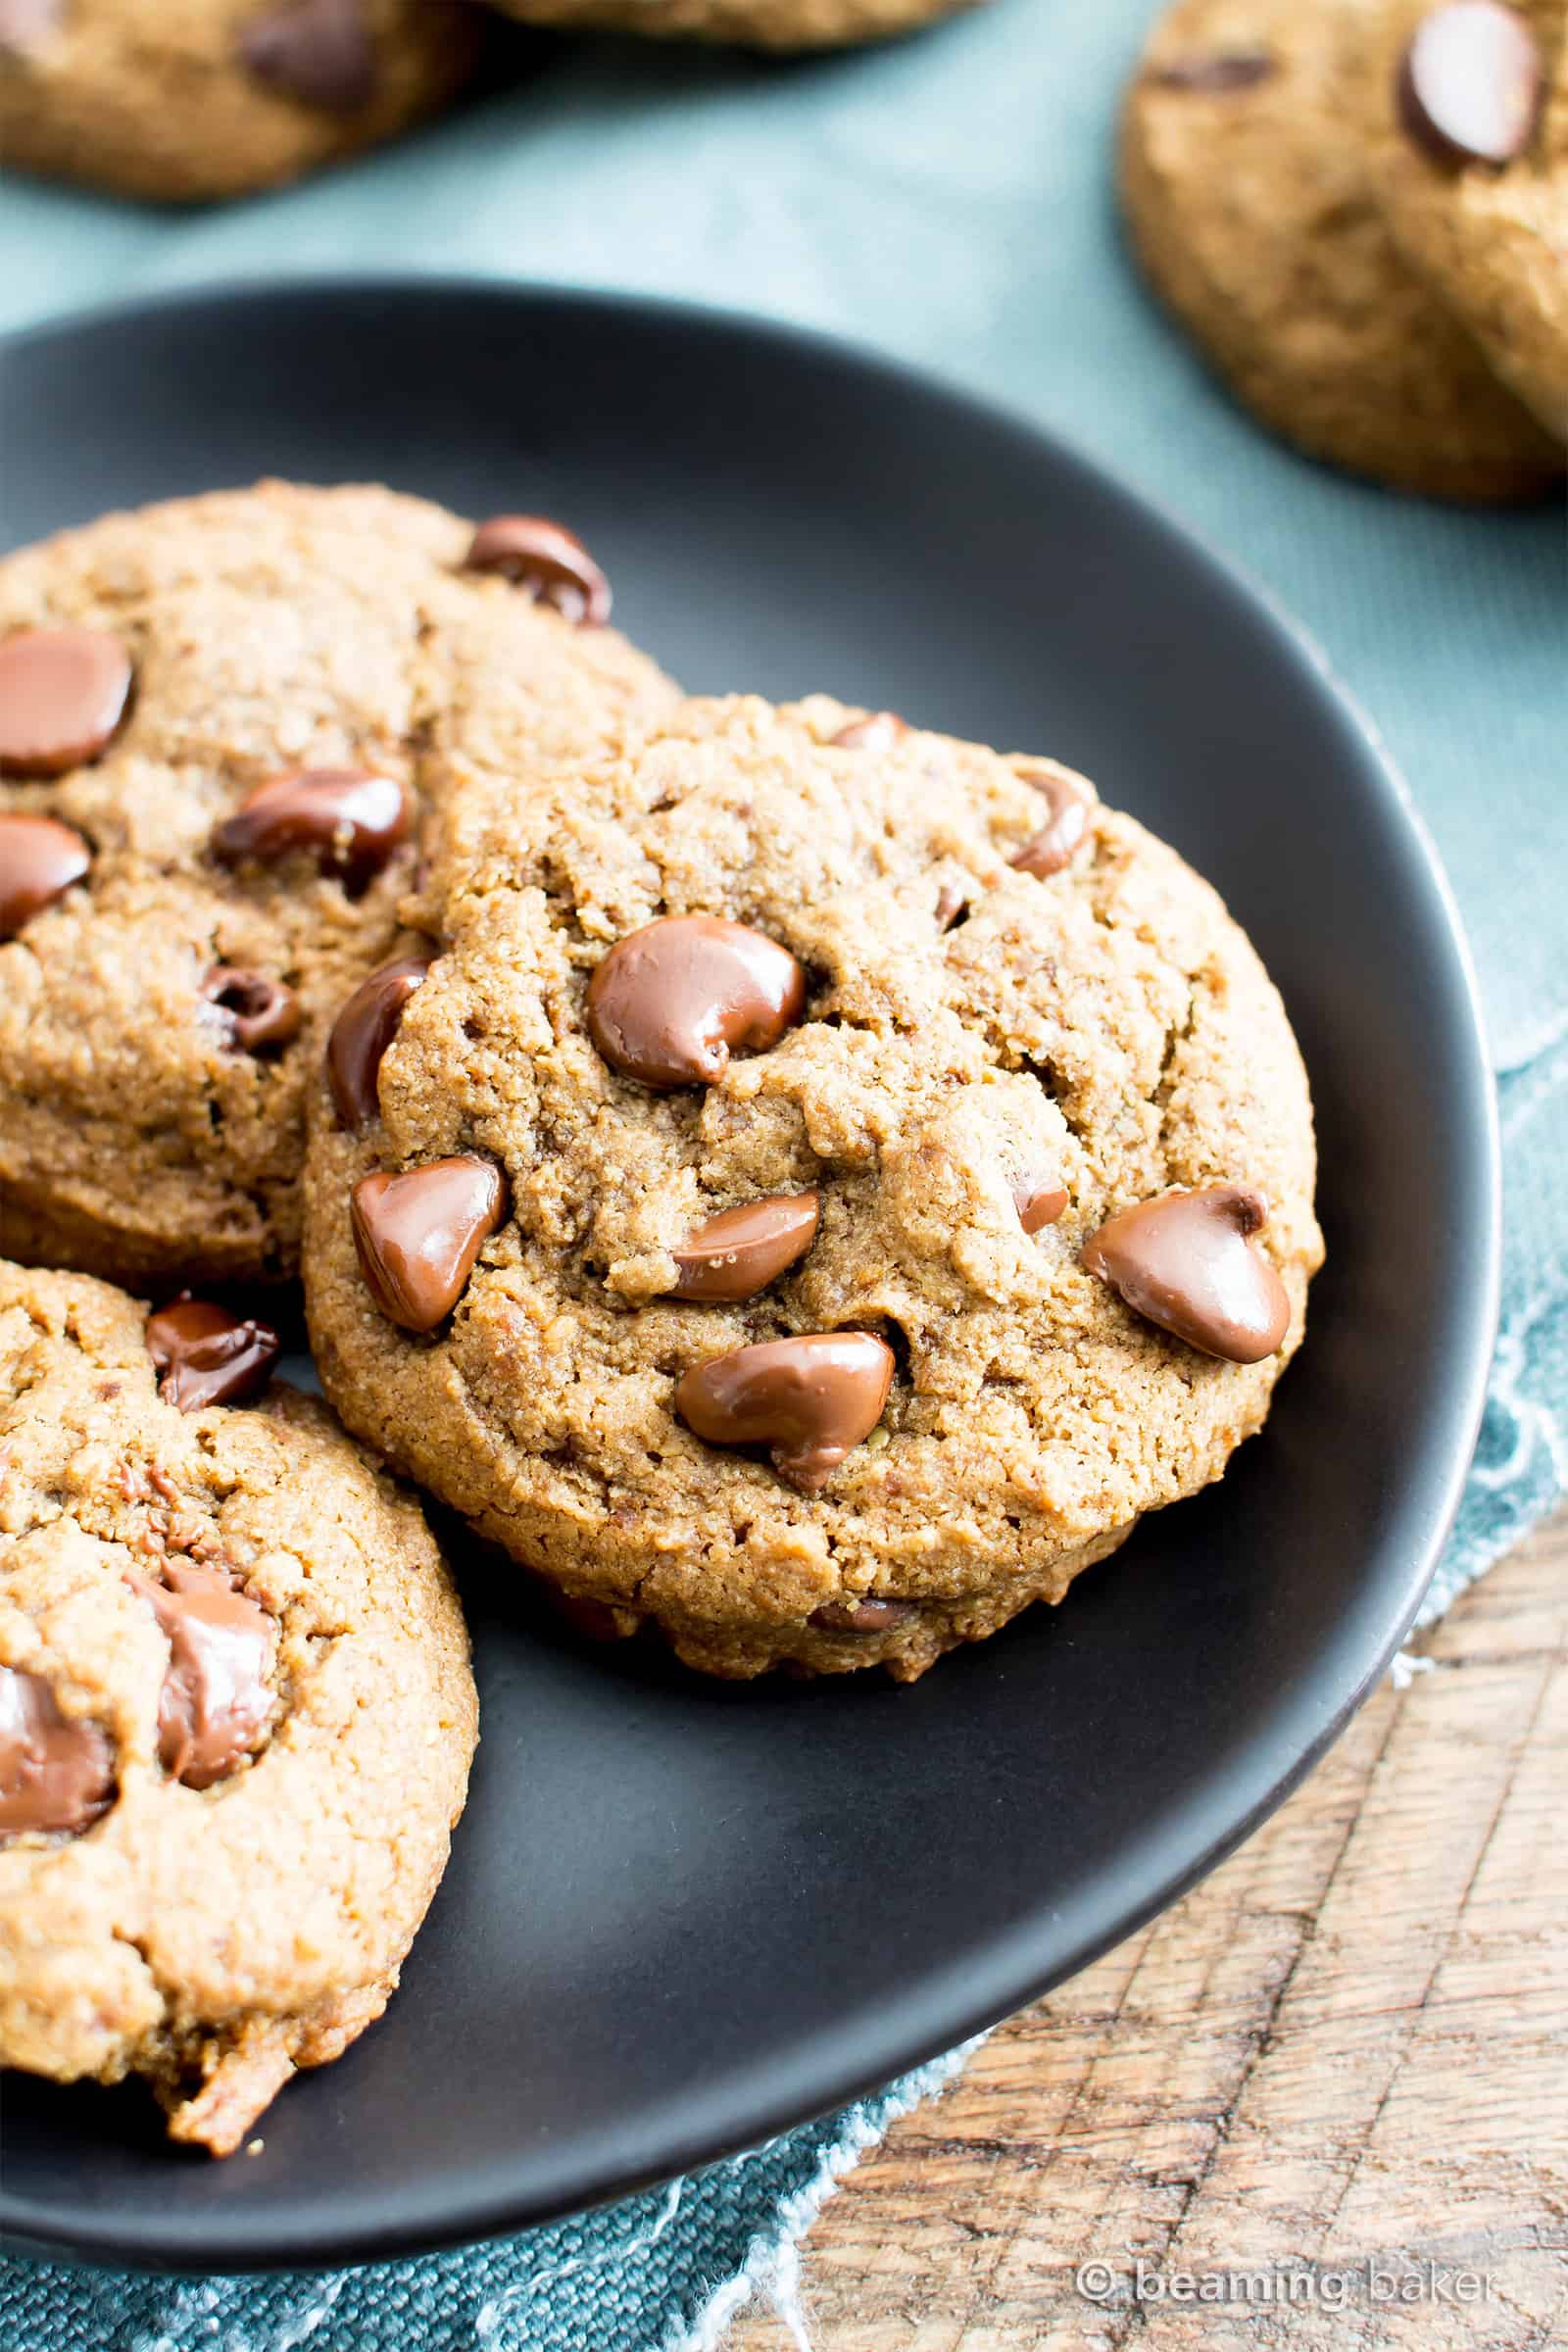 20+ Best Vegan Chocolate Chip Cookies: get ready to enjoy the best vegan chocolate chip cookie recipes! Including vegan oatmeal chocolate chip cookies, easy vegan chocolate chip cookies, vegan gluten free chocolate chip cookies and more! #vegancookies #chocolatechipcookies #veganchocolatechipcookies | Recipes on BeamingBaker.com